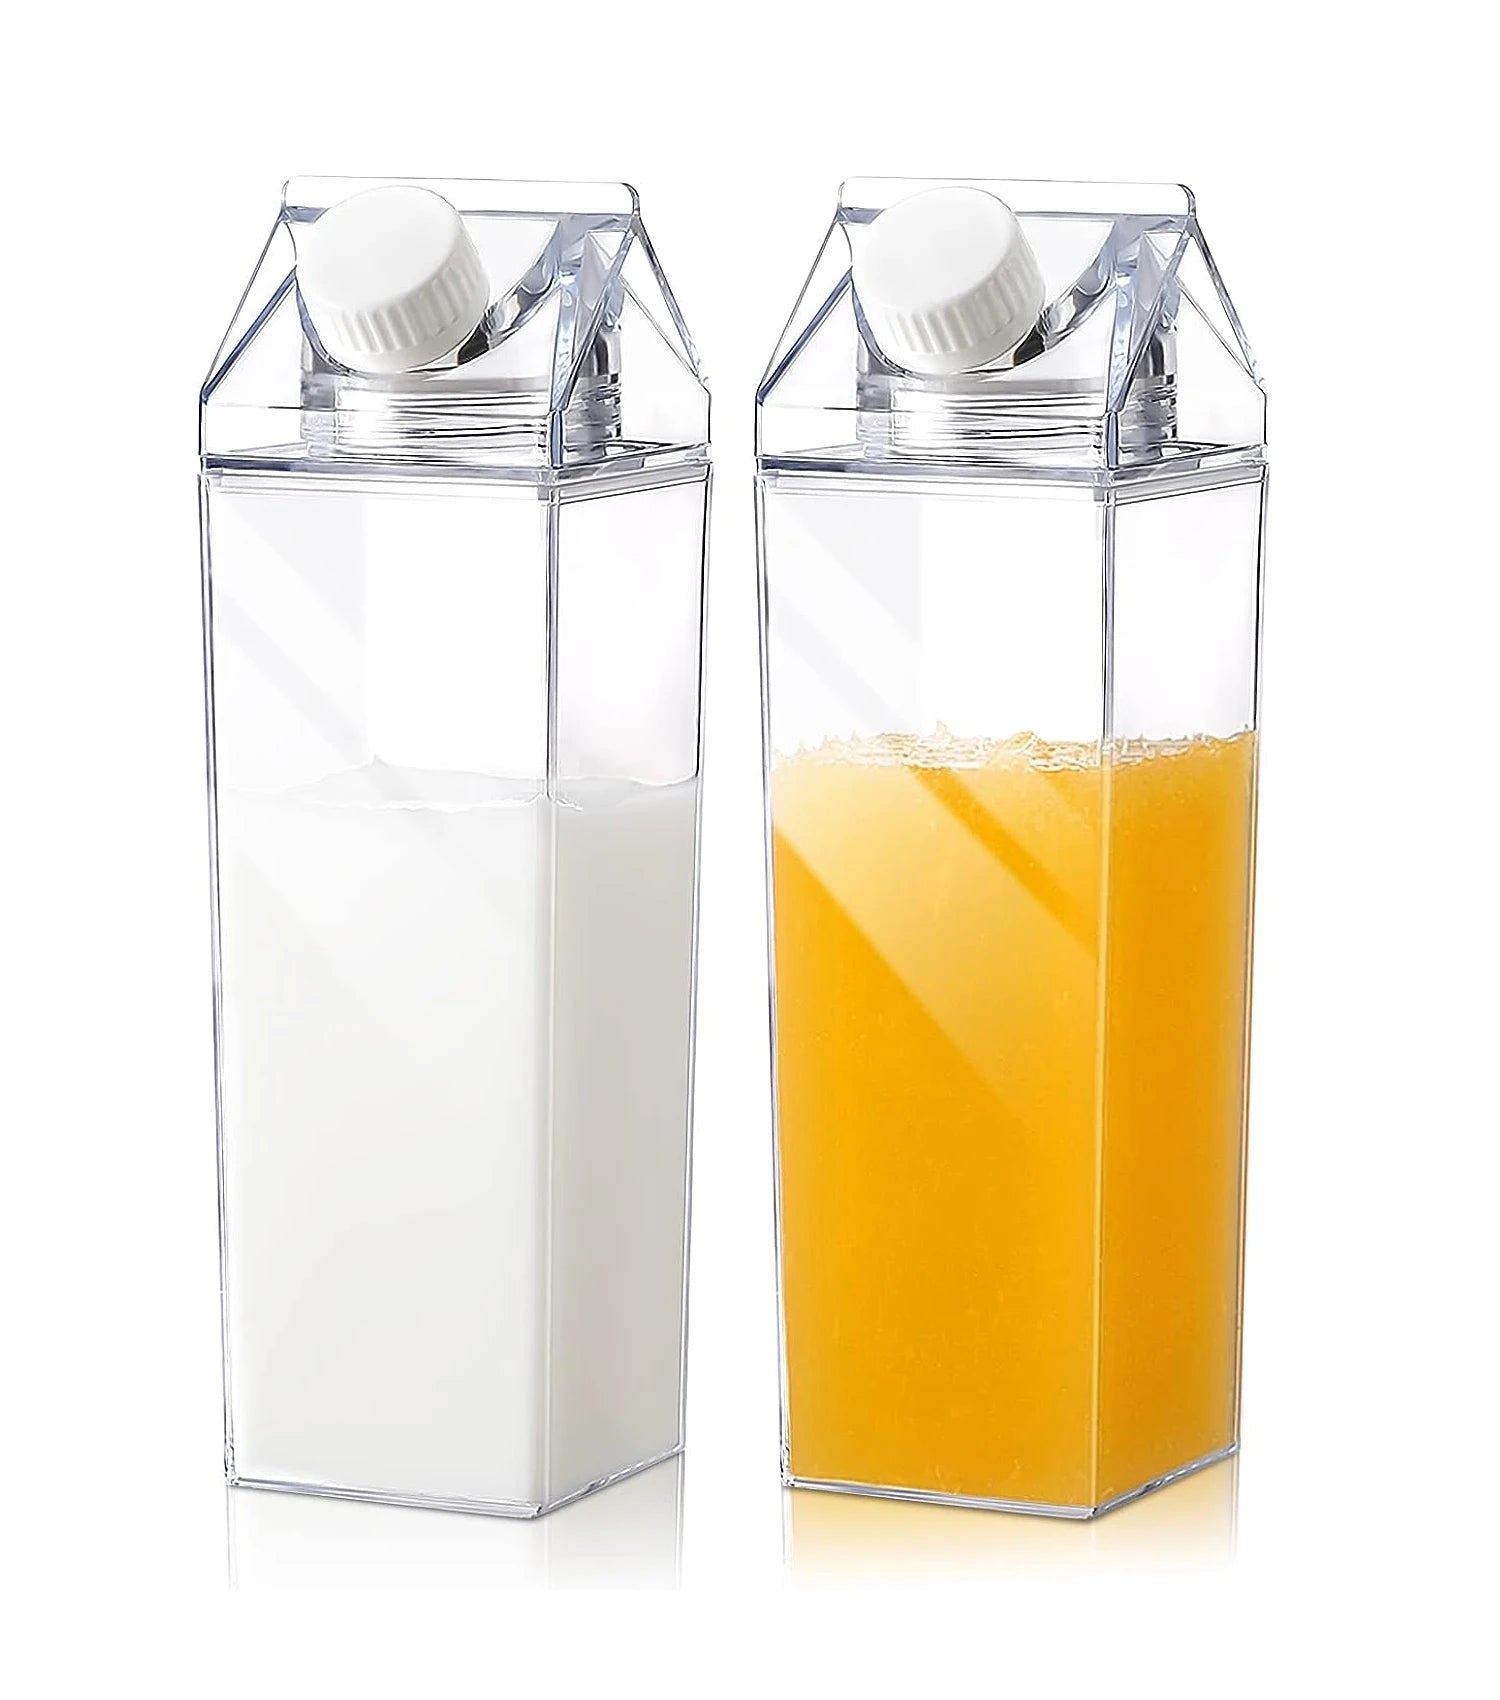 1000ML Square Plastic Milk Carton Water Bottle for Sports, Camping, and Gym 2pcs-1000ML / 500-1000ML